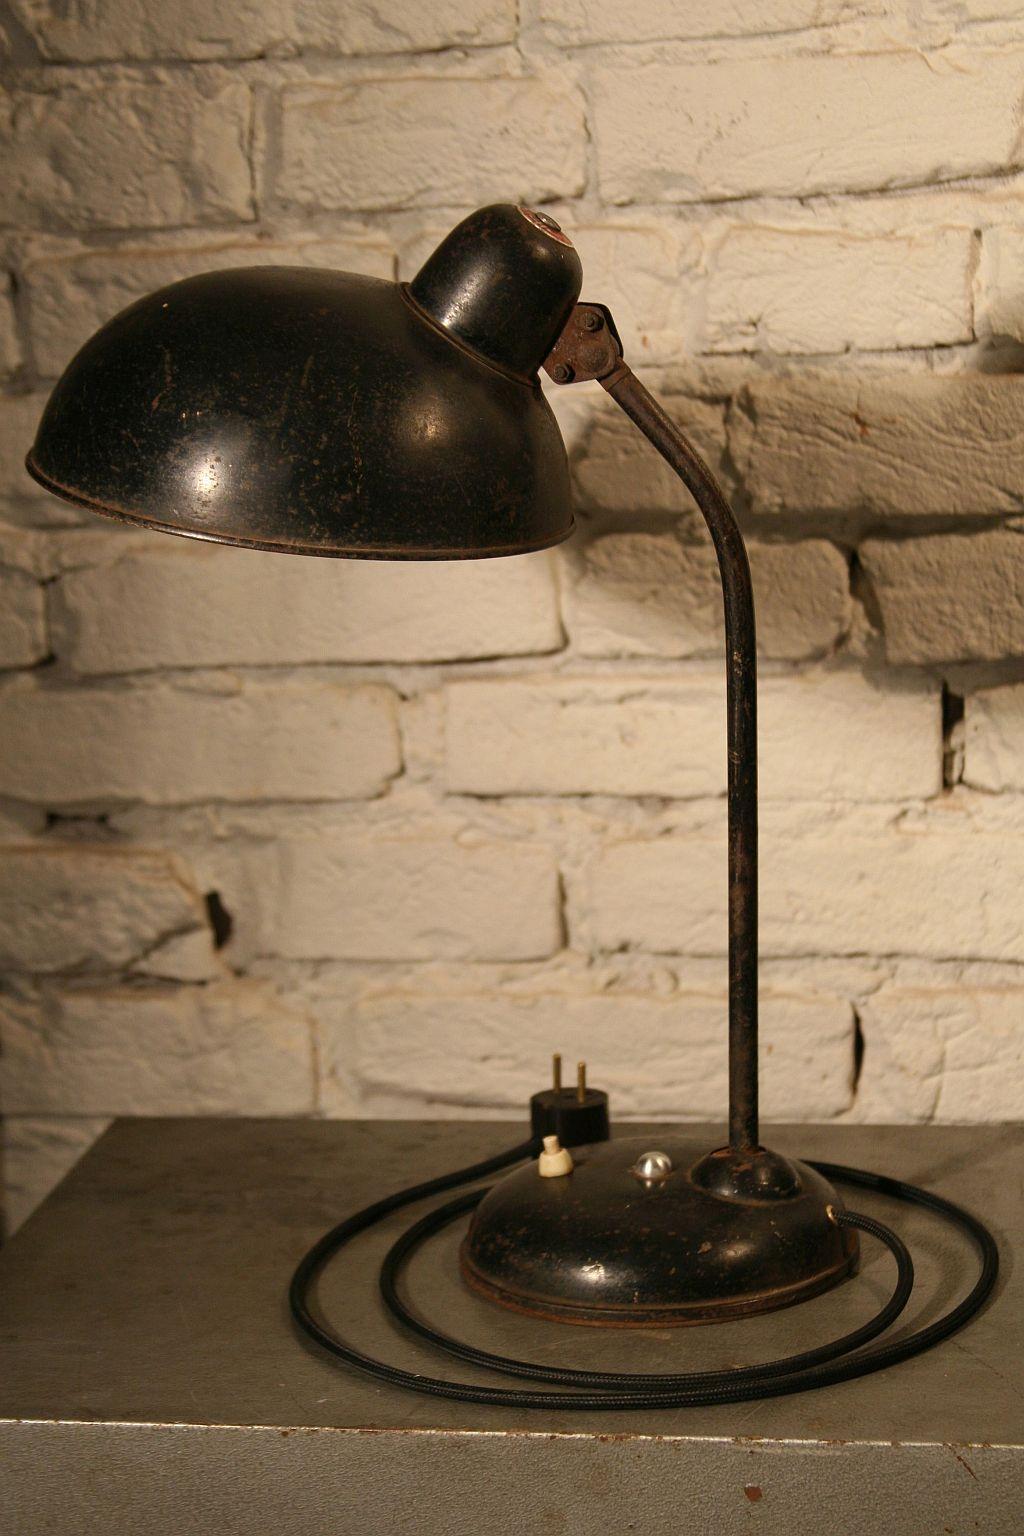 An original desk lamp from the 1930s designed by Christian Dell, produced in Breslau by the German company Helo with the trademark of the Kaiser Leuchten KG Company.
Construction:
The lamp is made of steel, the lower and upper part of the arm has